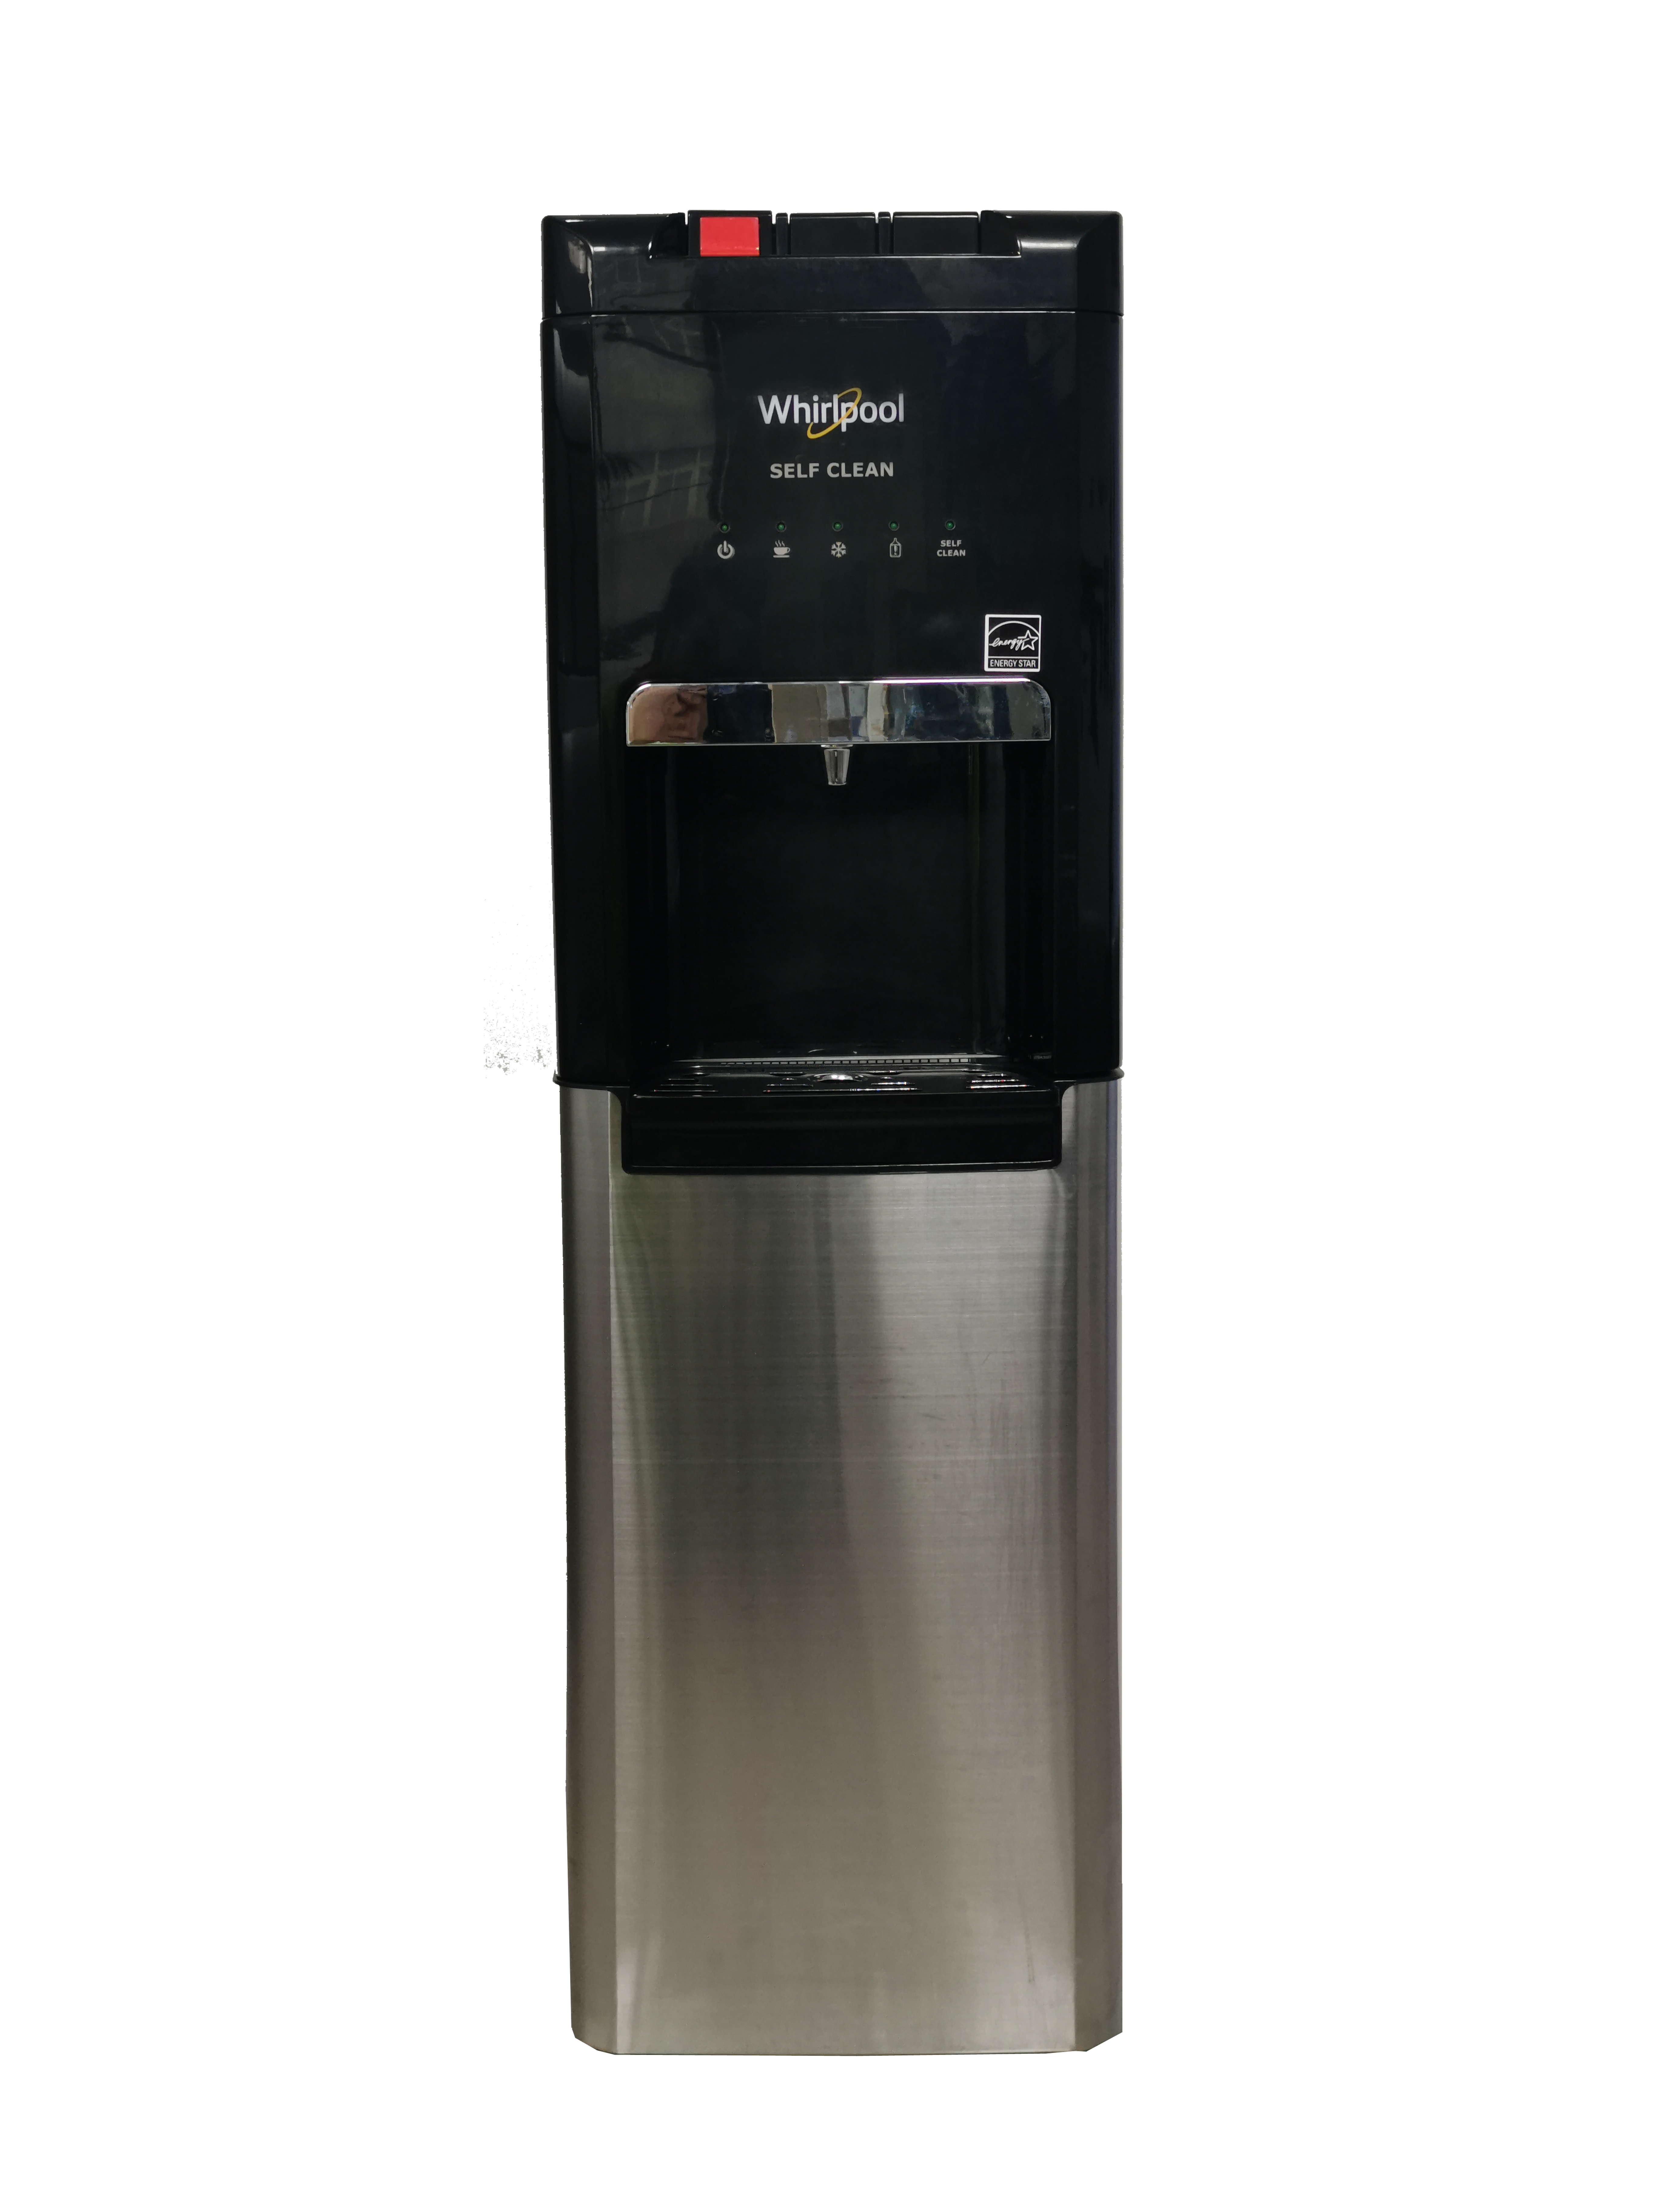 Whirlpool Self-Cleaning, Bottom Loading, Hot, Cool and Cold, Water Dispenser with Stainless Door - image 1 of 8